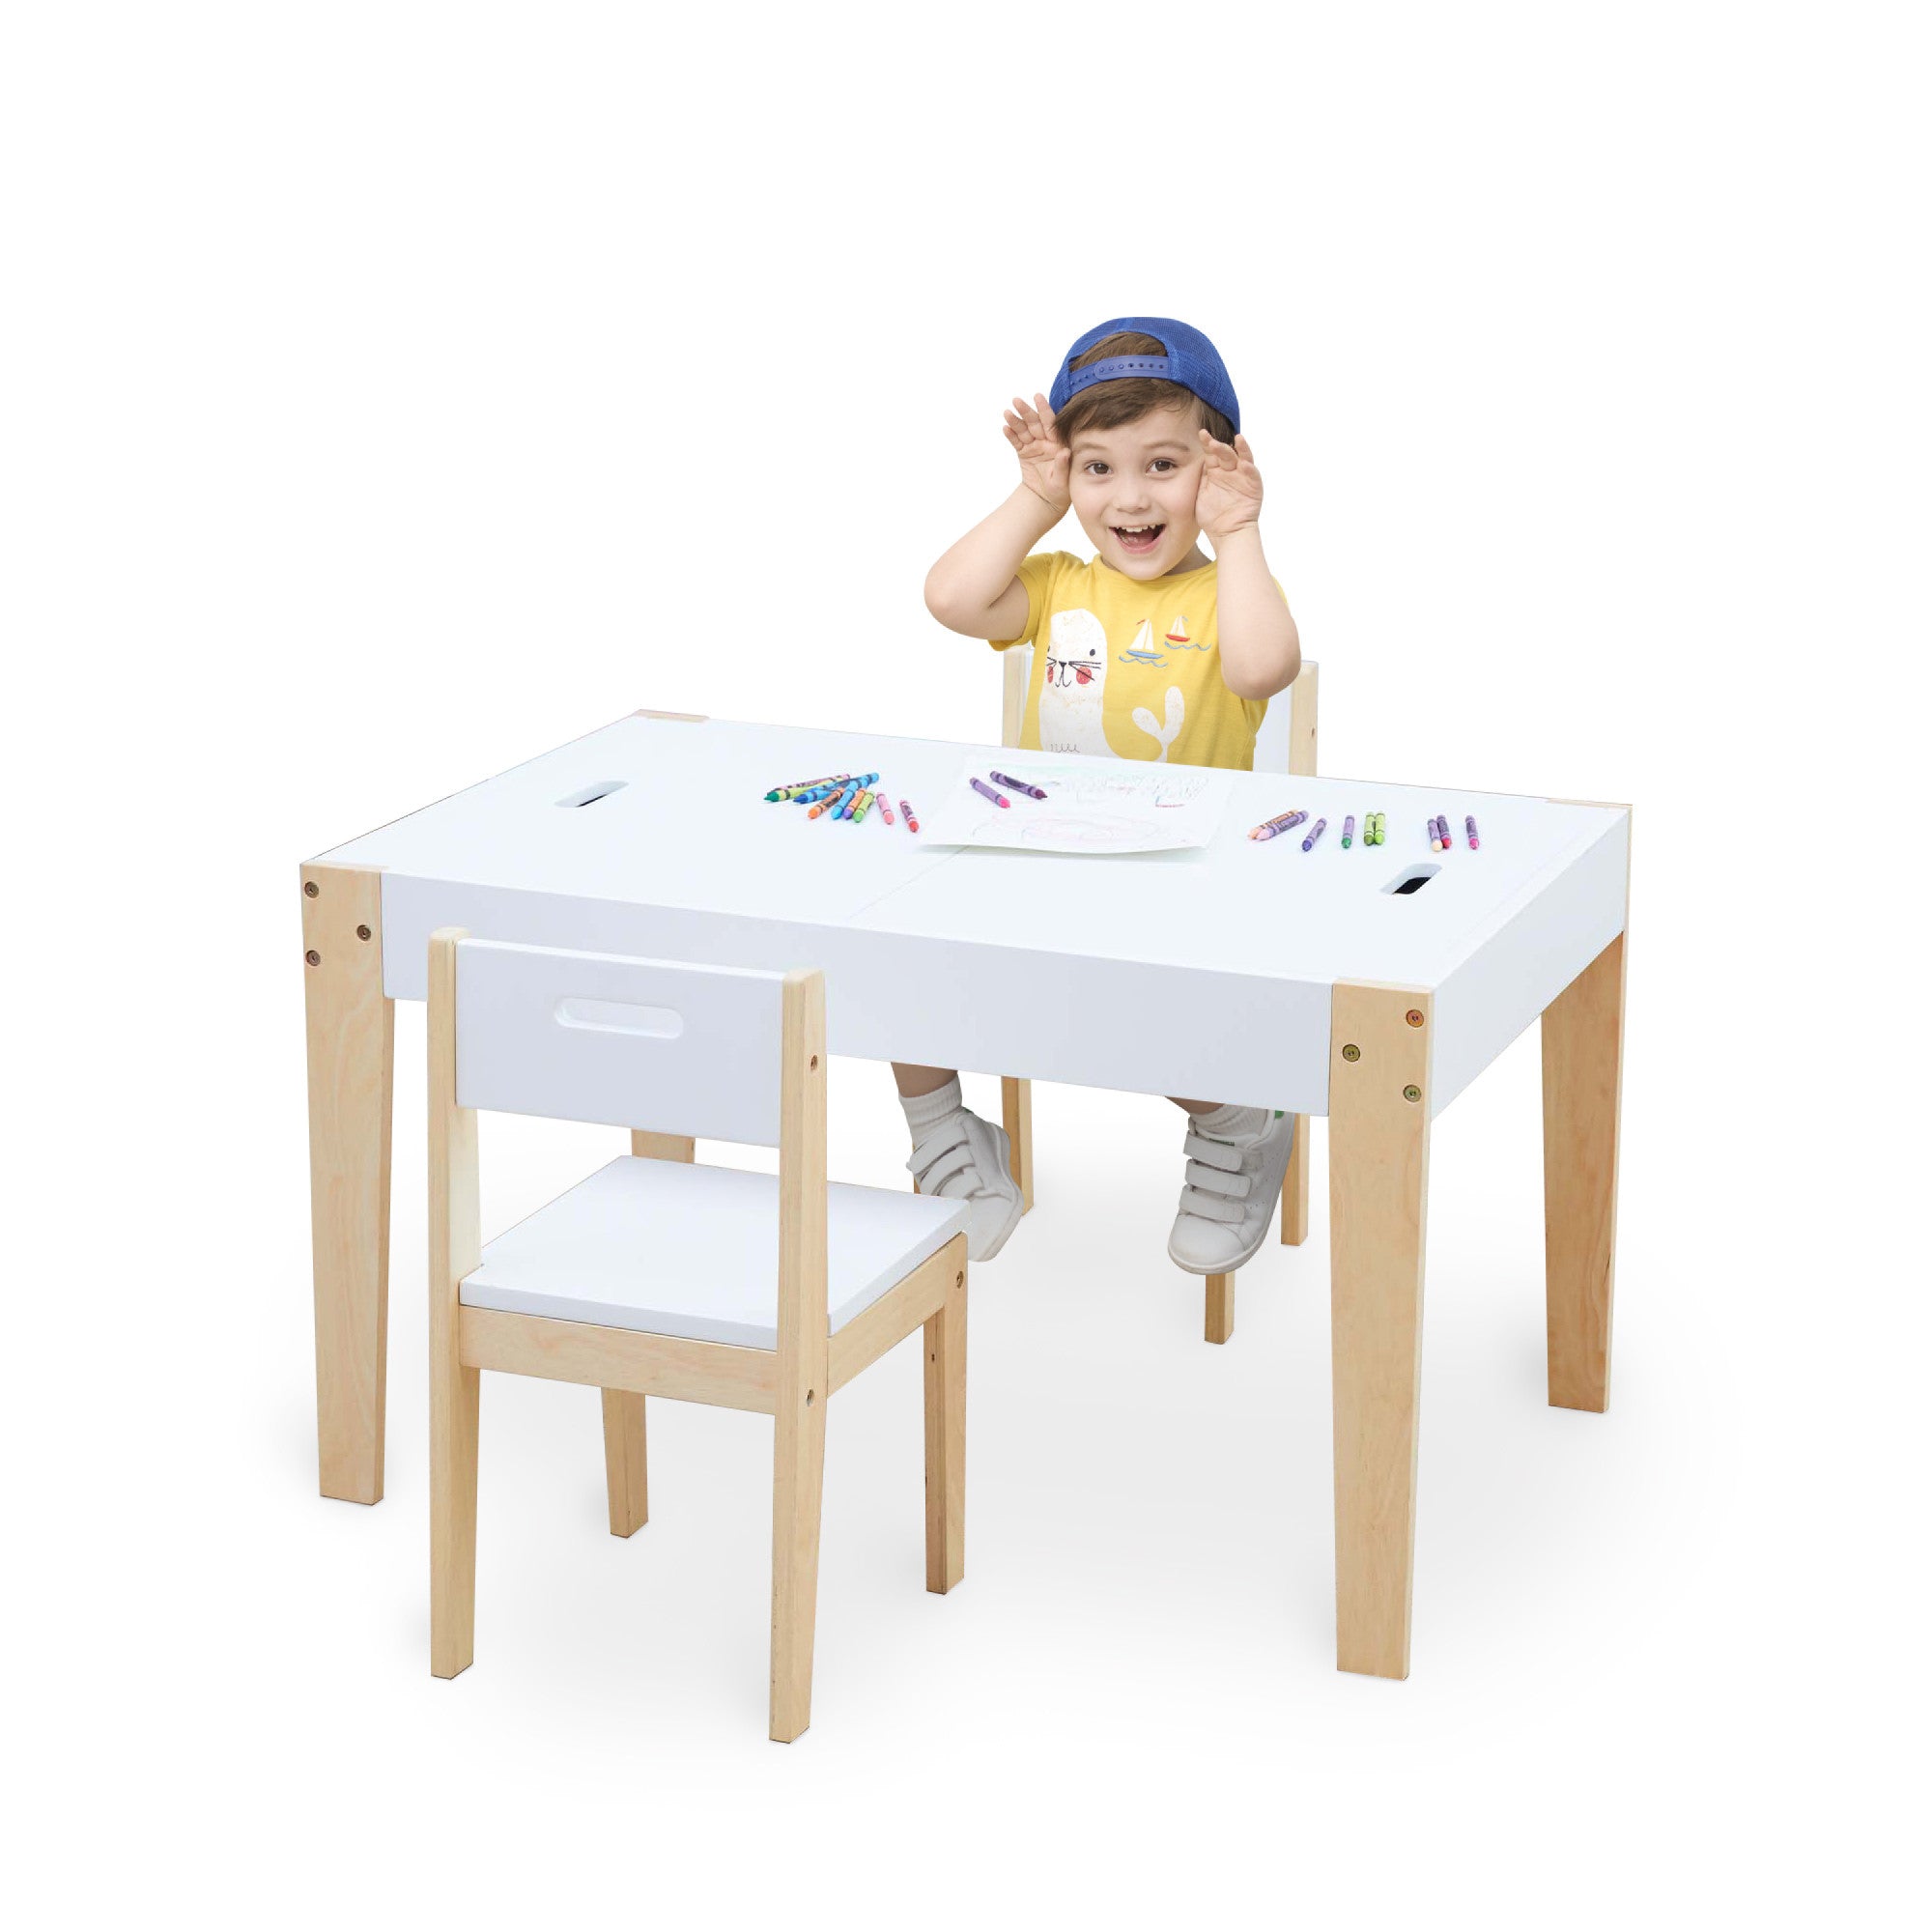 Fantasy Fields  3 Piece Play Table and Chairs Set with Storage and 2-Way Chalkboard Table Top, White